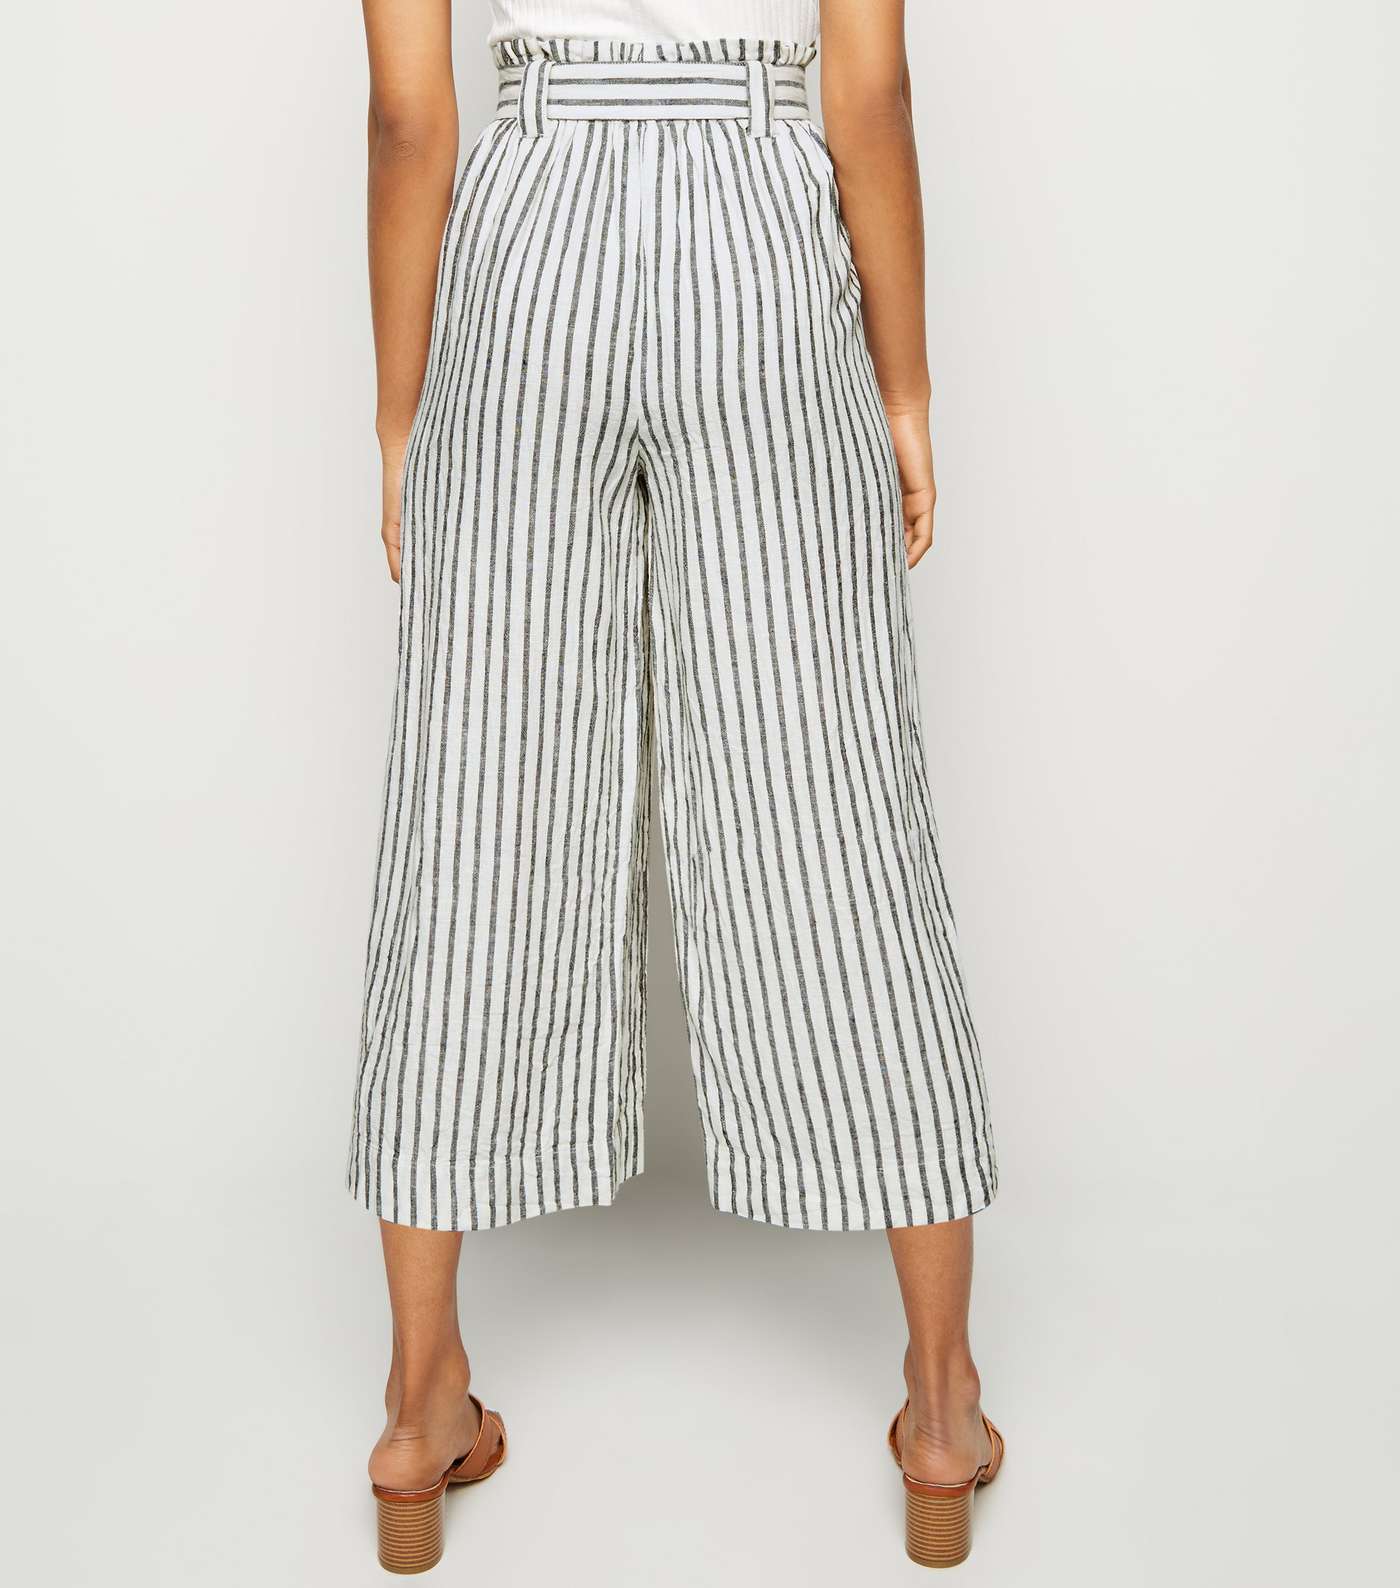 Petite Off White Linen Blend Cropped Trousers Image 3